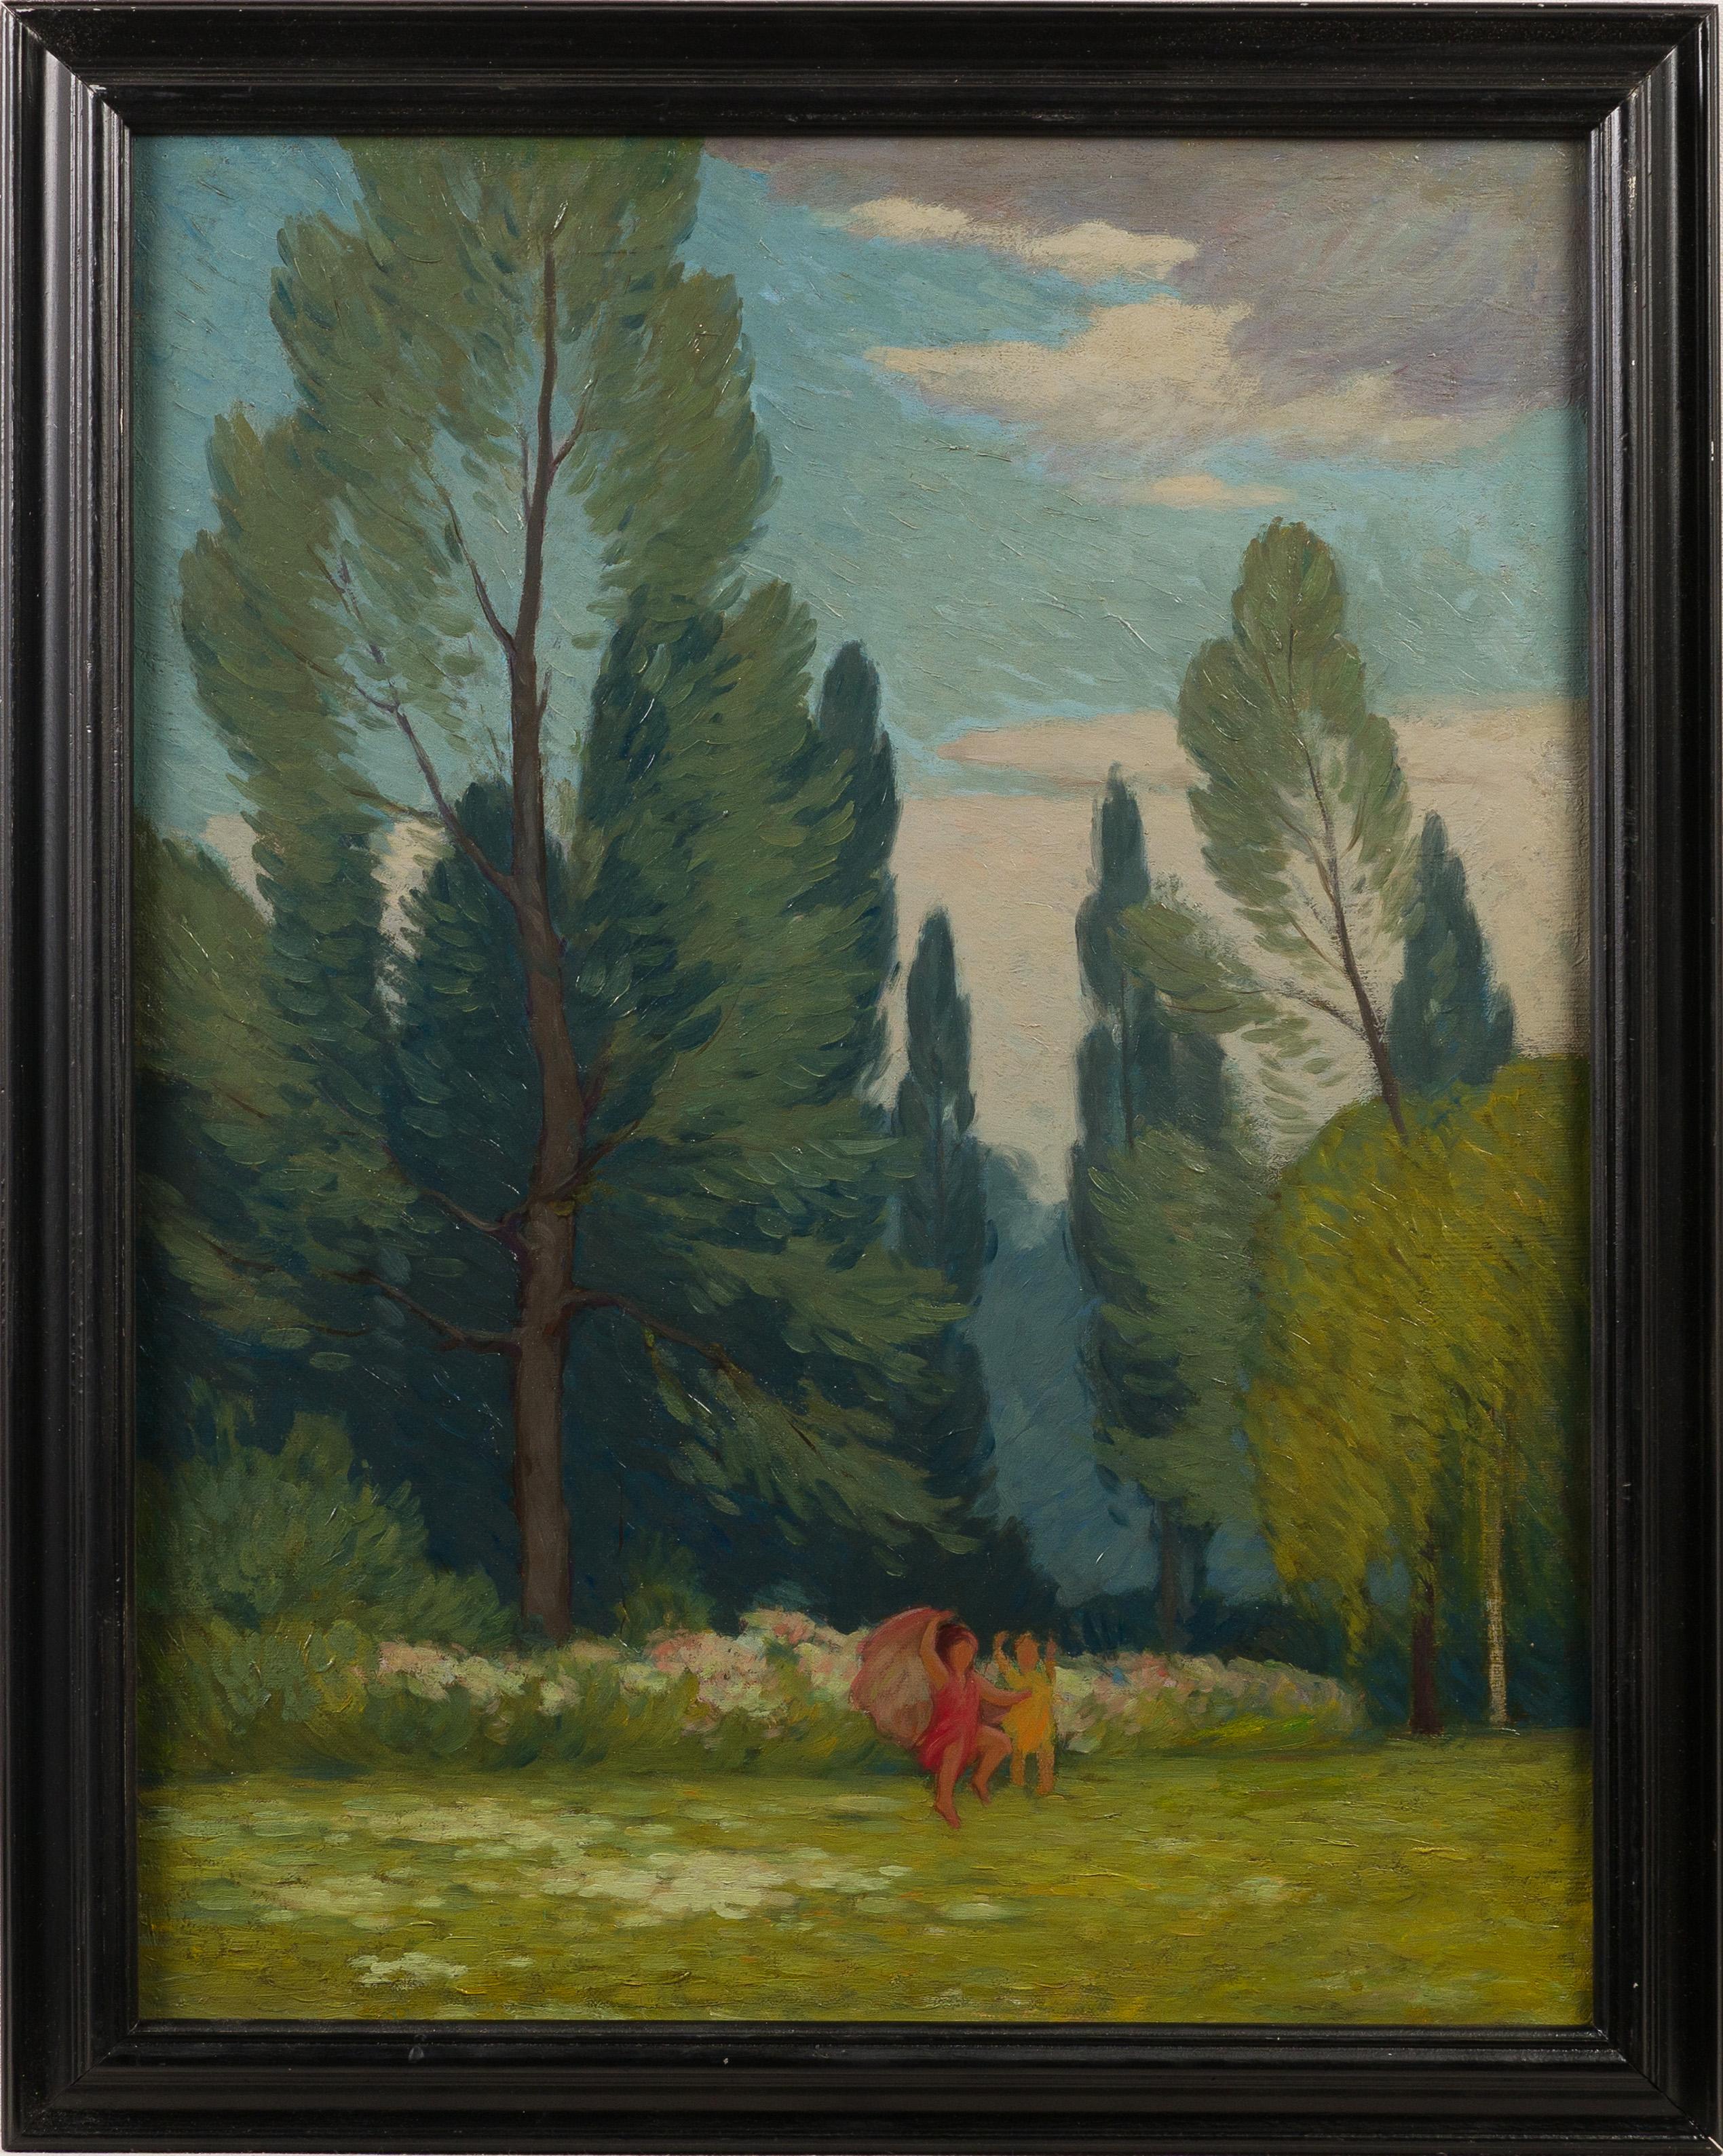 Antique American impressionist landscape oil painting.  Oil on canvas.  Framed.  No signature found.